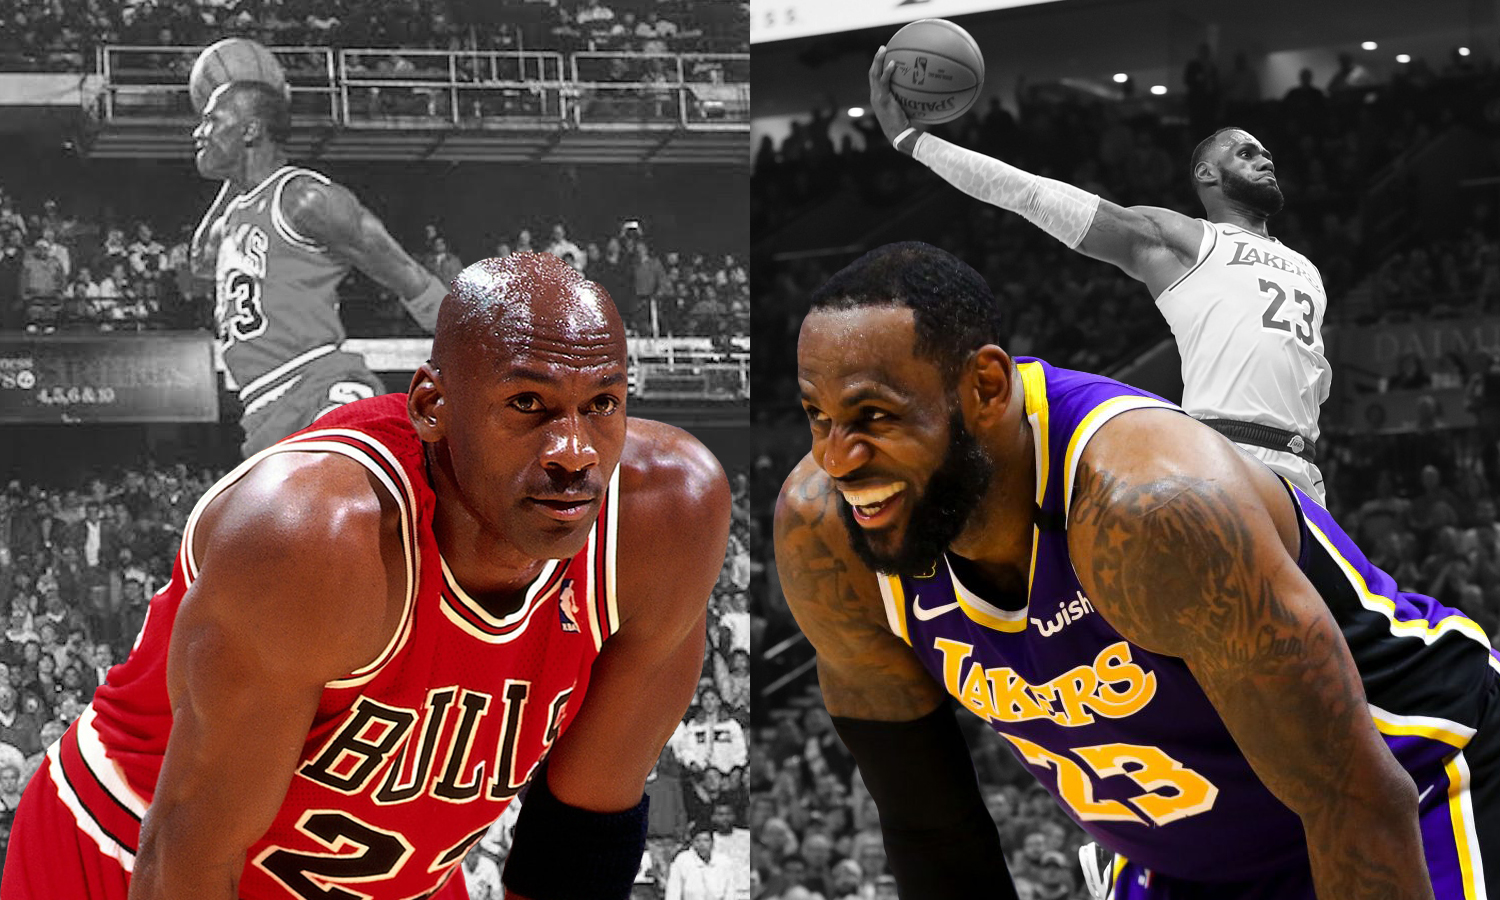 Michael Jordan vs. LeBron James: Deep dive into the G.O.A.T. debate and its fallacies – The Swing of Things